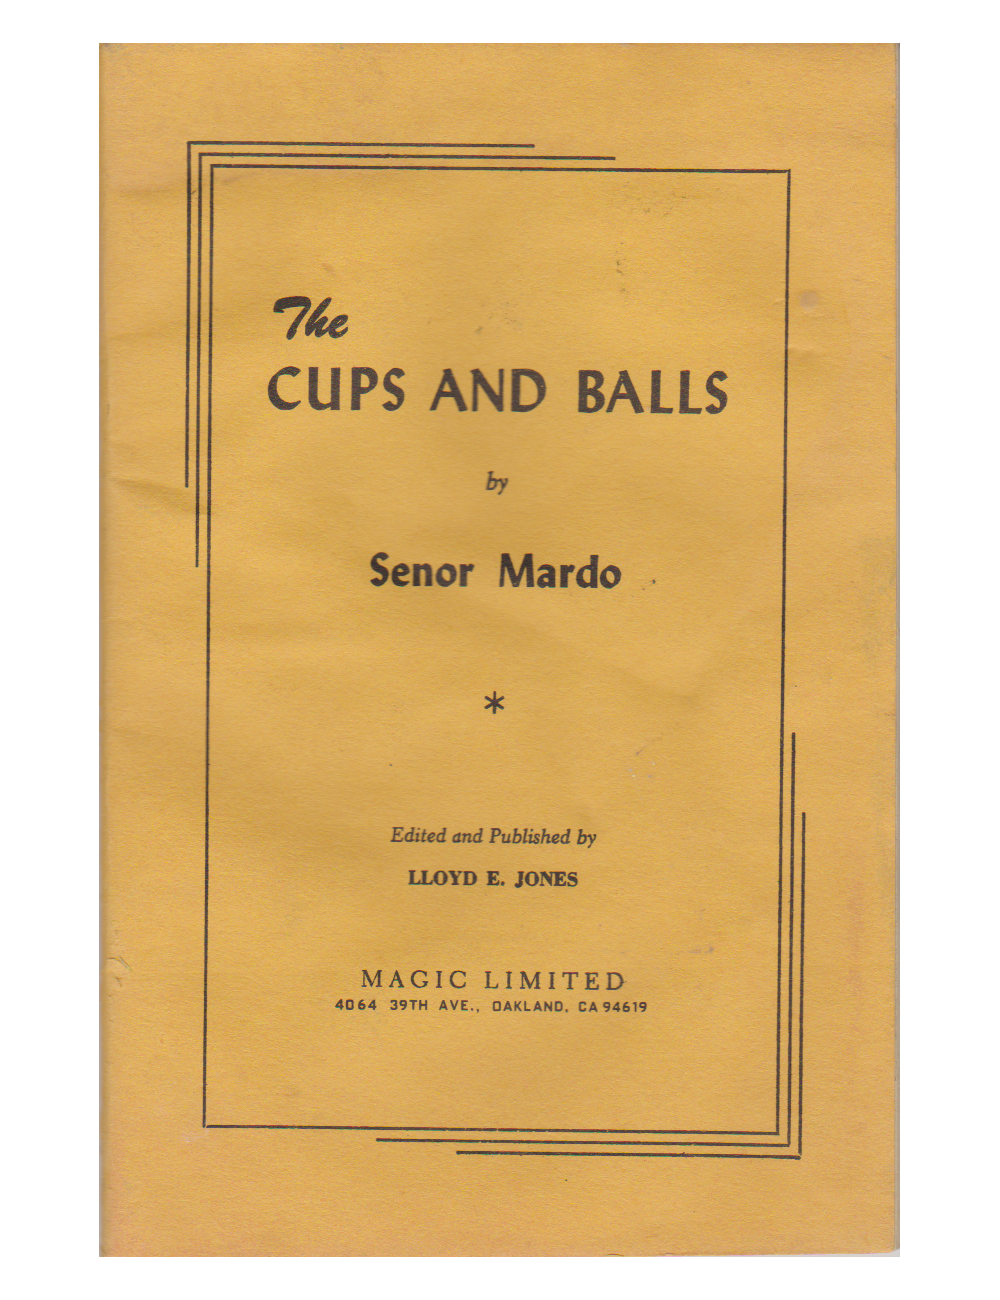 THE CUPS AND BALLS by Senor Mardo